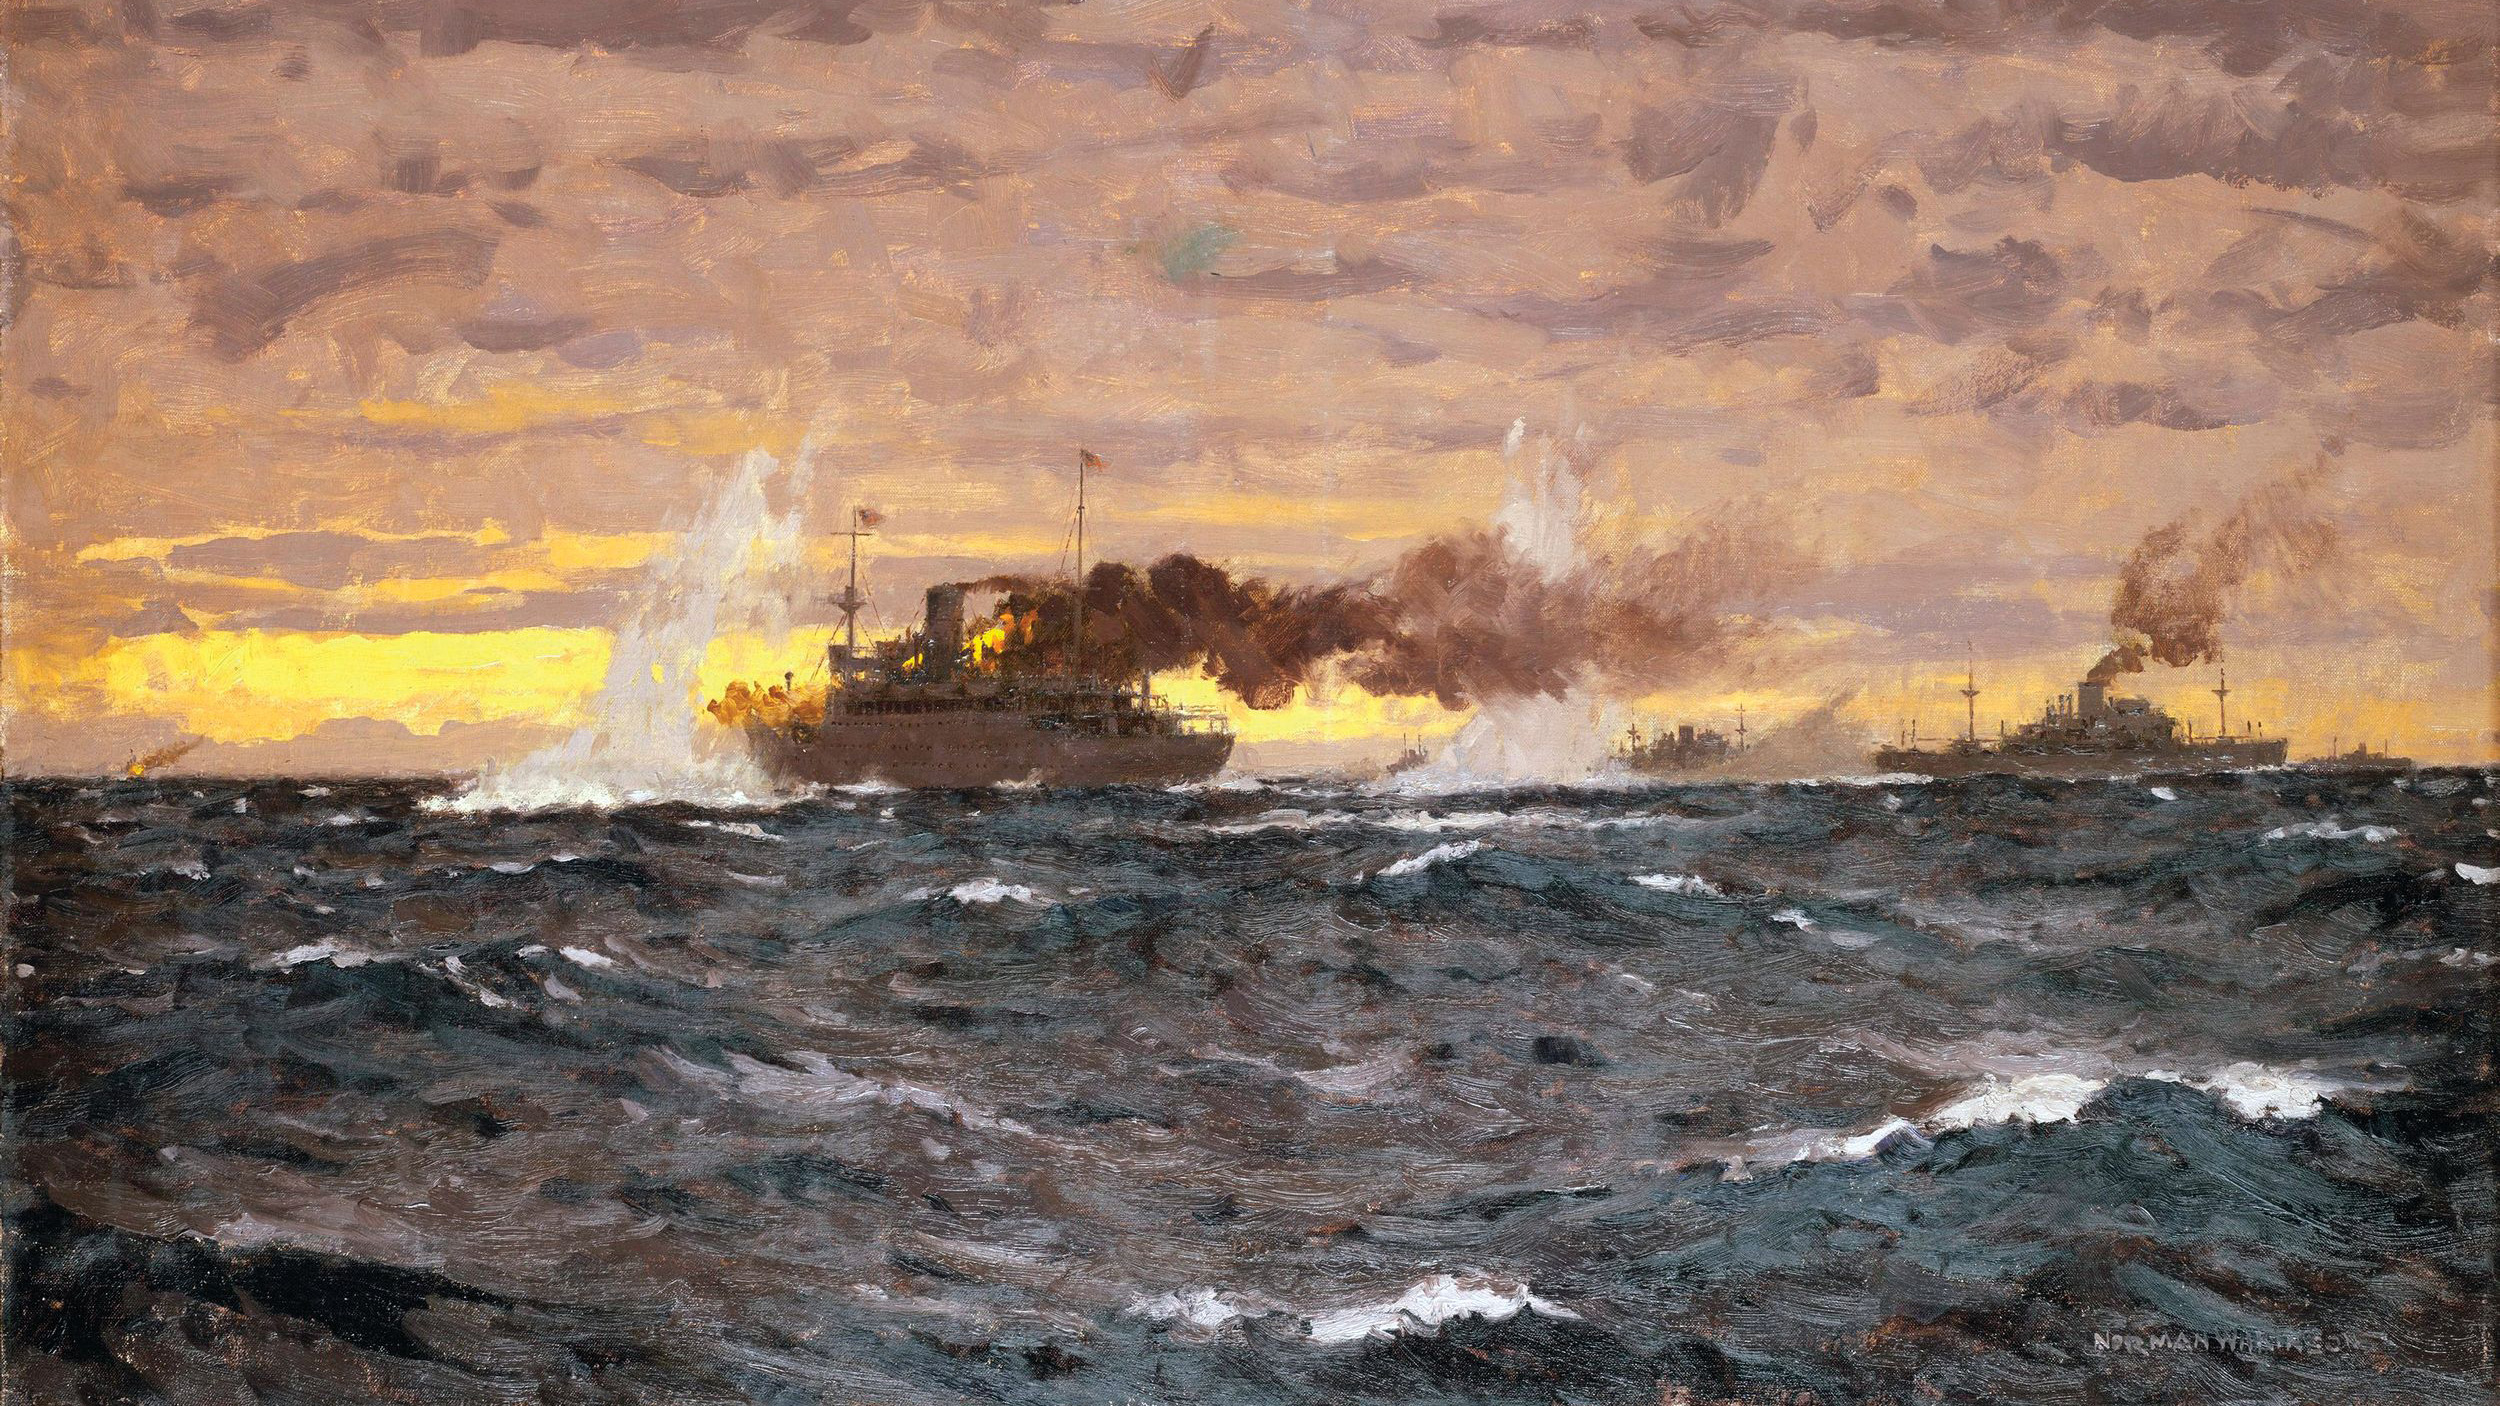 In this painting by artist Norman Wilkinson, the British armed merchant cruiser Jervis Bay is shown in flames as geysers from near-misses rise skyward. Jervis Bay’s opponent in this one-sided battle was the German pocket battleship Admiral Scheer. Although hopelessly outgunned, Jervis Bay took on Admiral Scheer in keeping with the finest traditions of the Royal Navy.